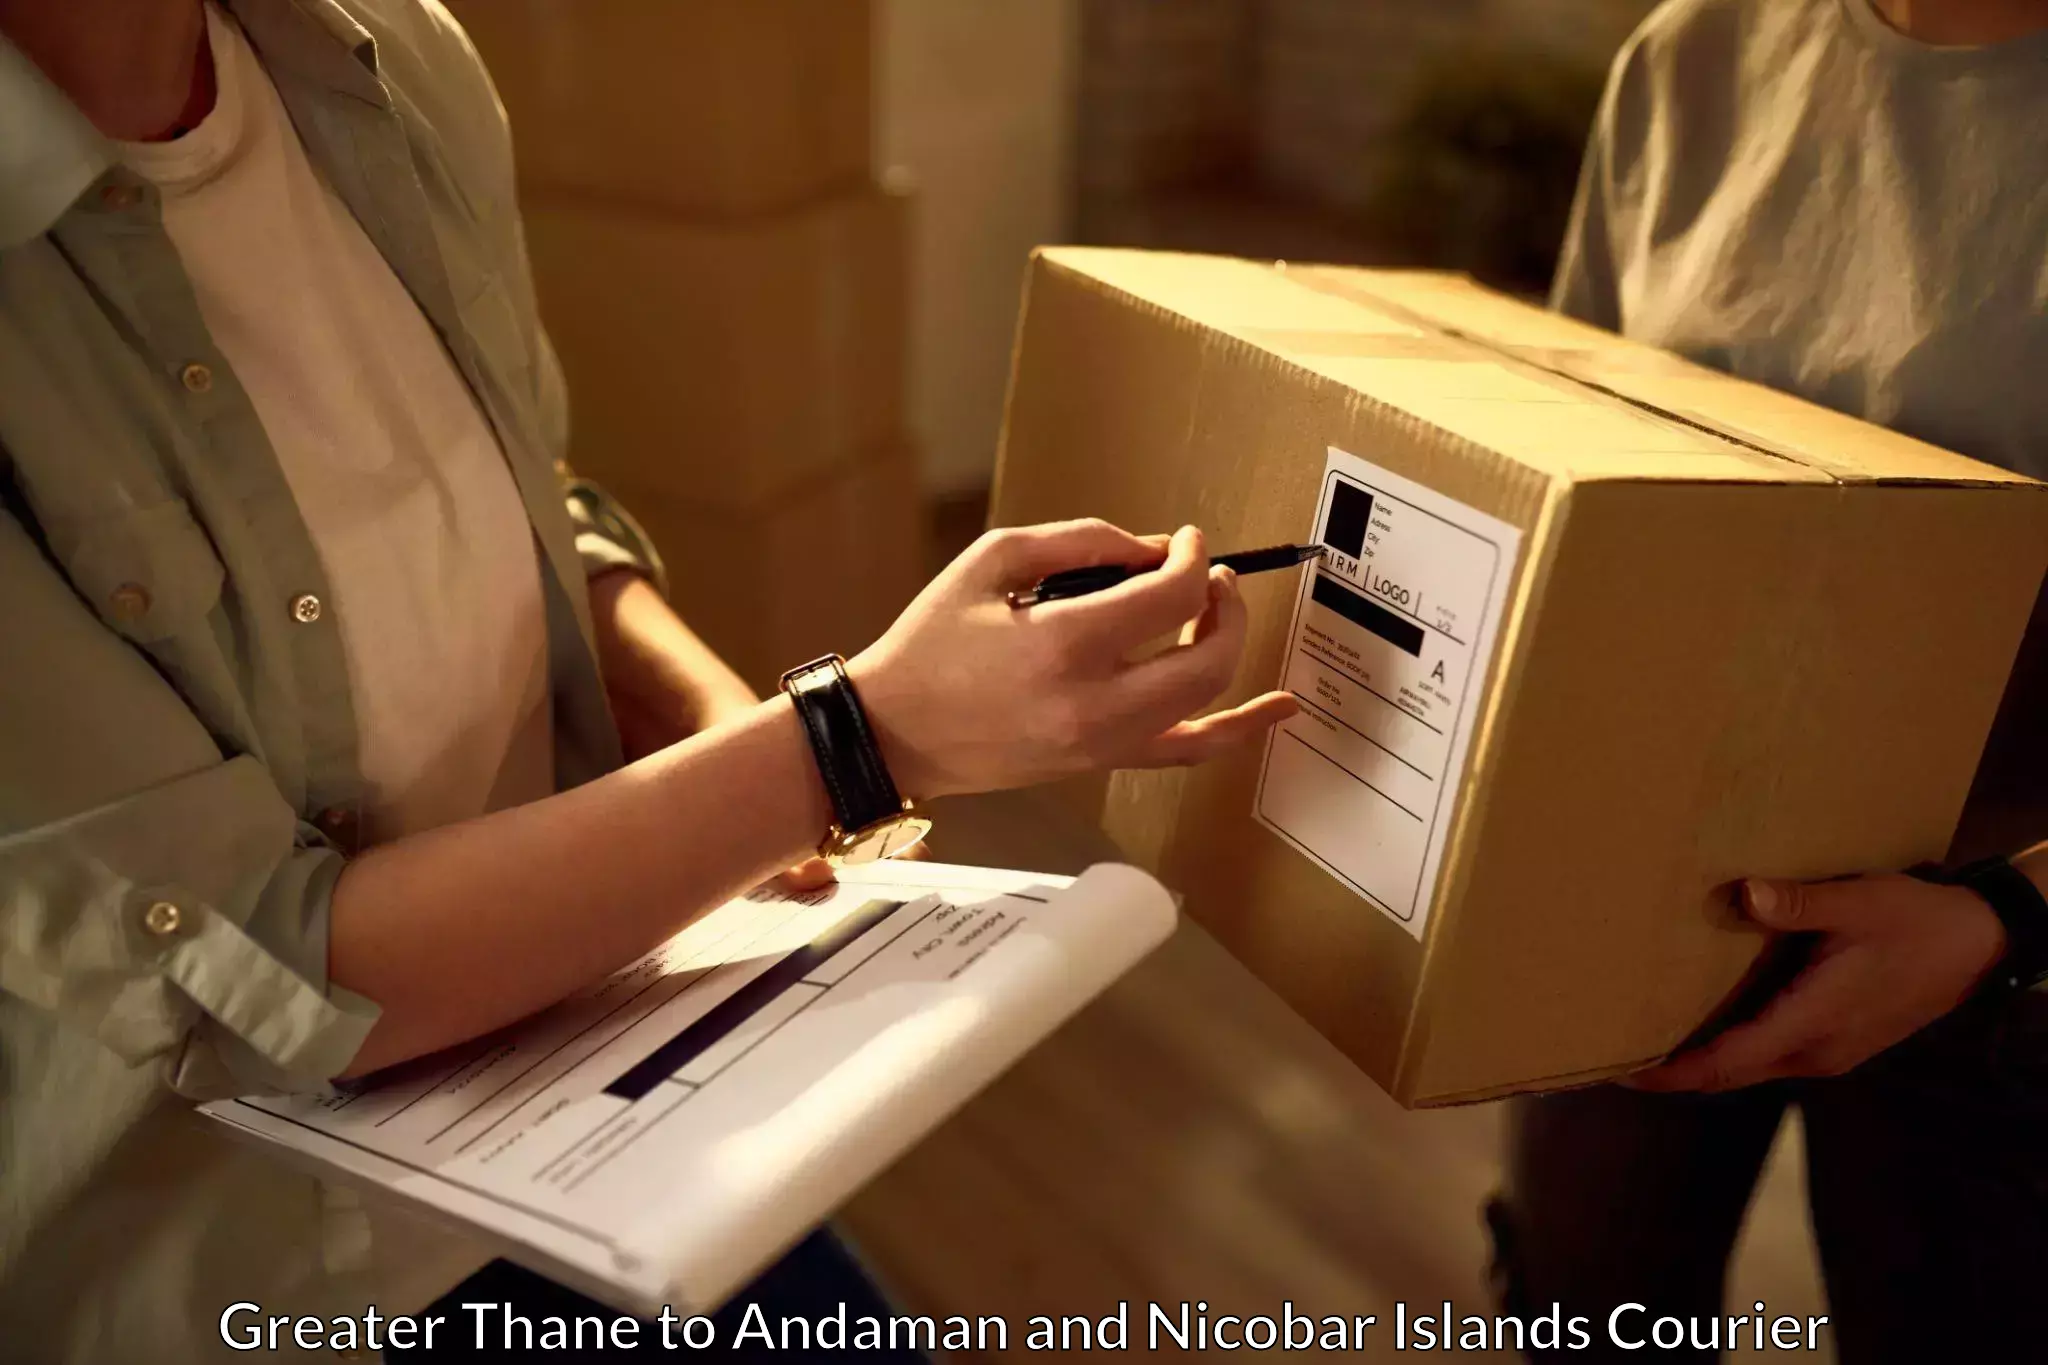 Digital shipping tools in Greater Thane to Andaman and Nicobar Islands